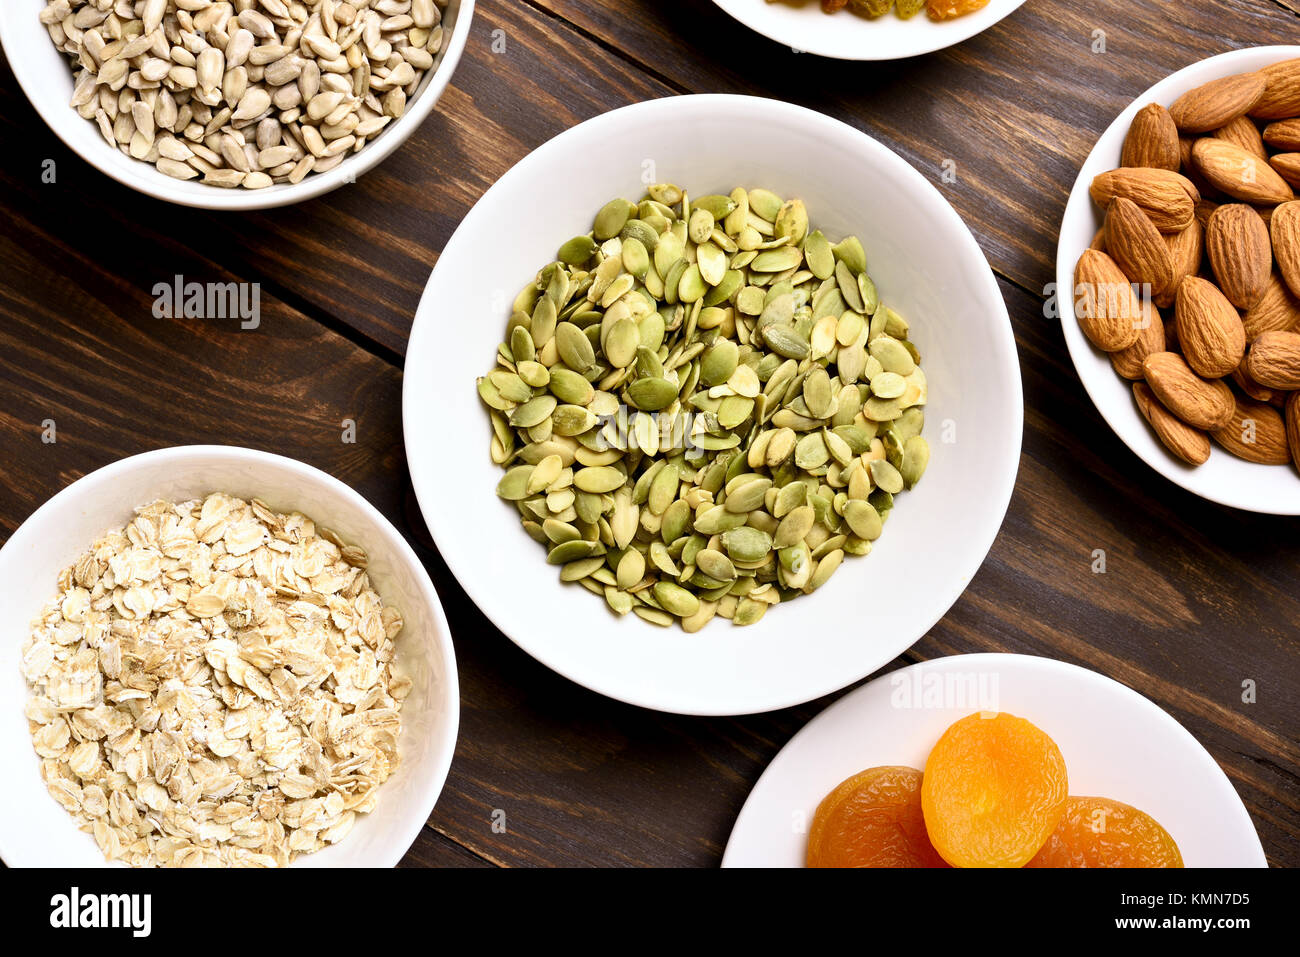 Ingredients for cooking granola on wooden table. Healthy snack in bowl. Top view, flat lay Stock Photo